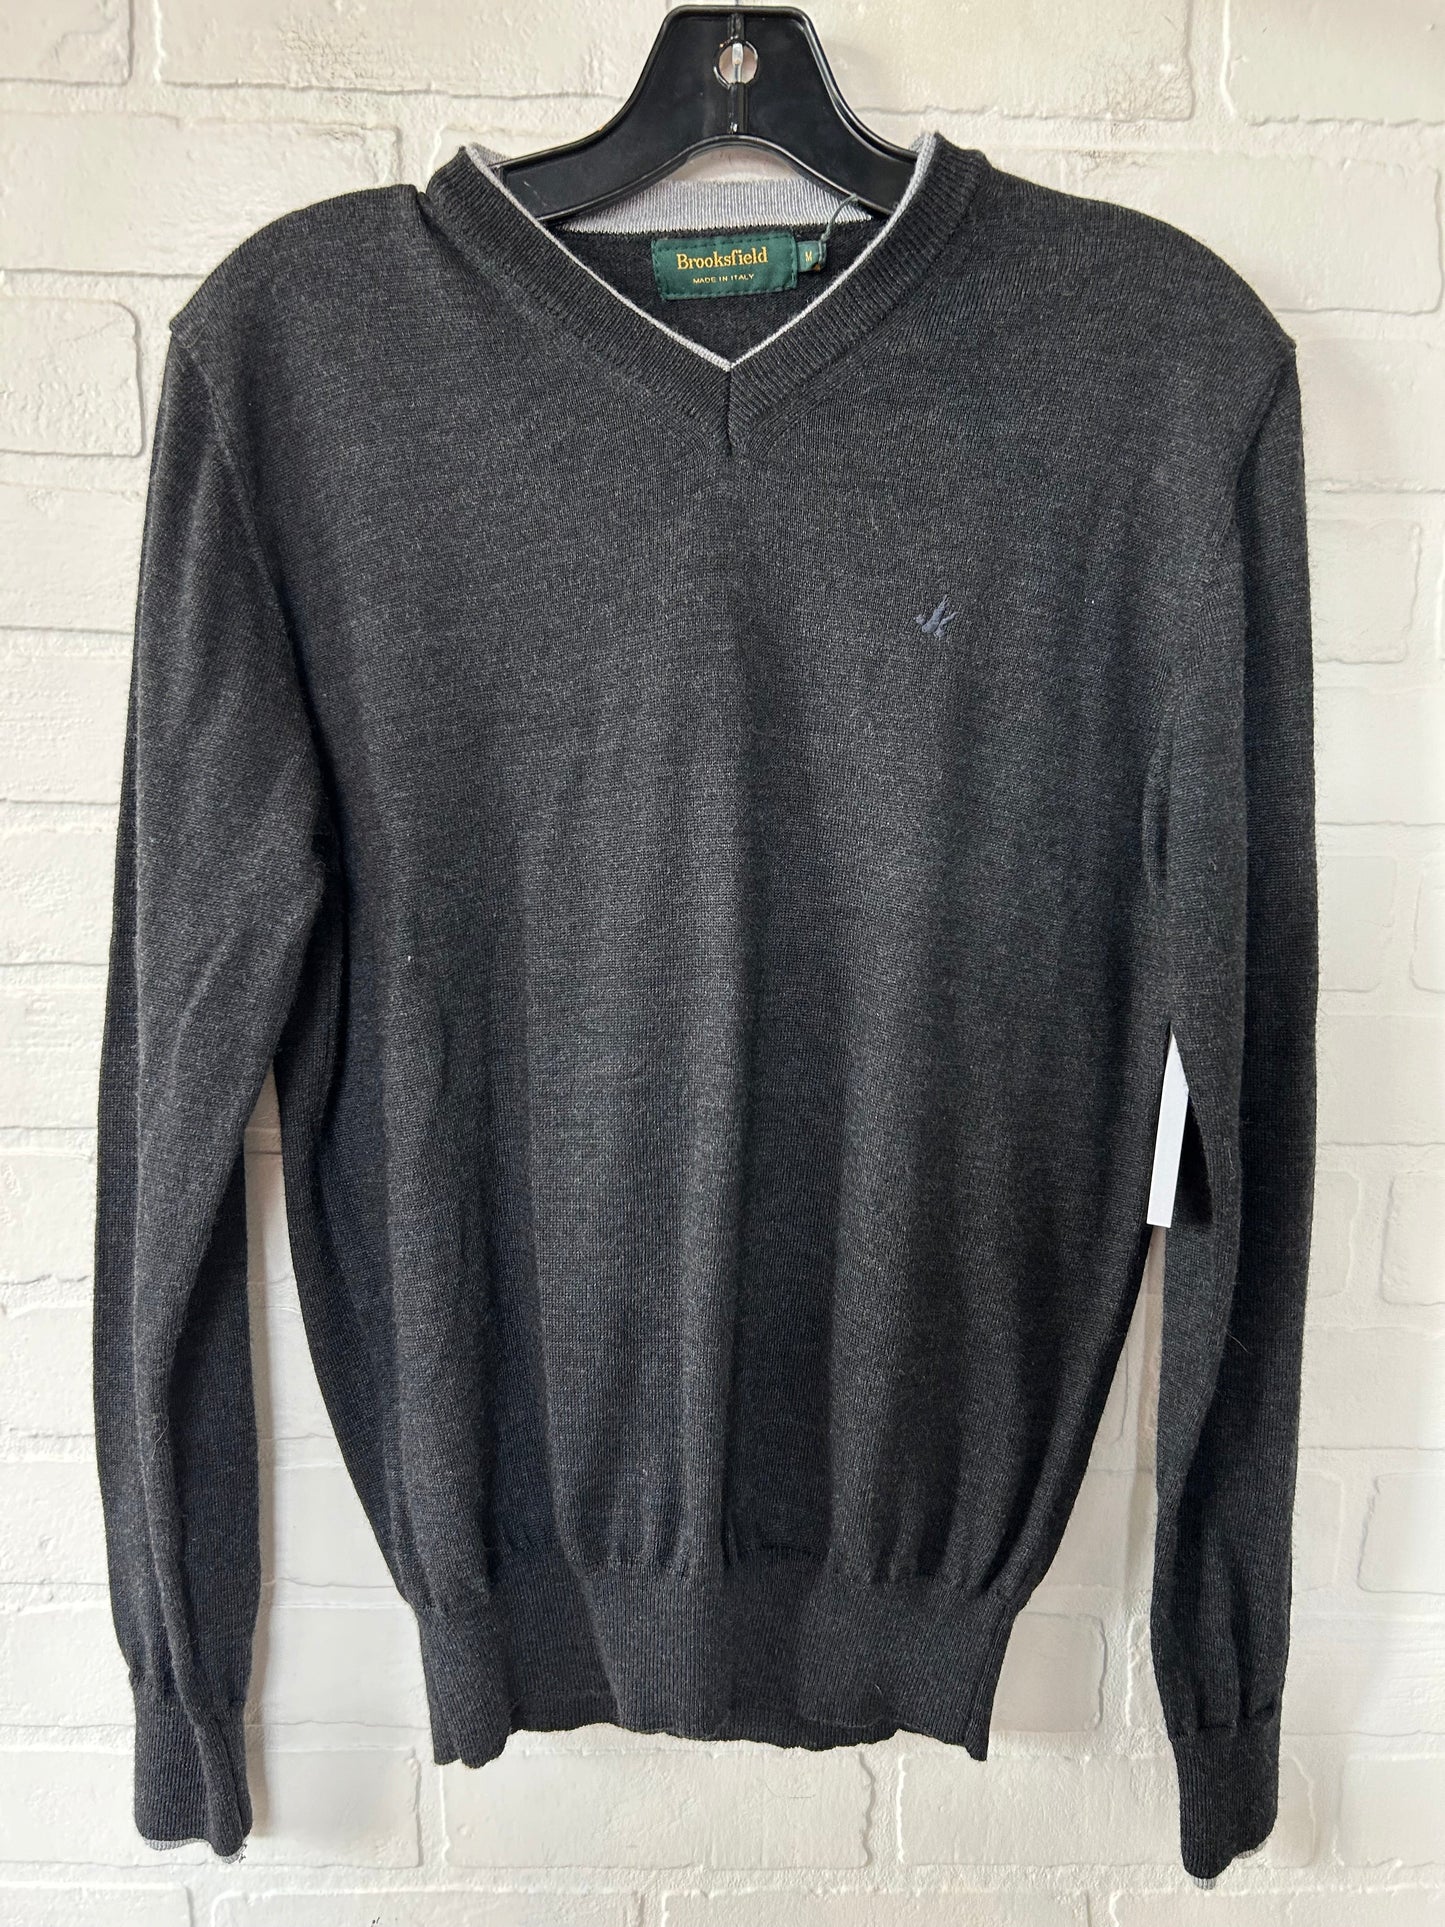 Charcoal Sweater Brooksfield, Size M